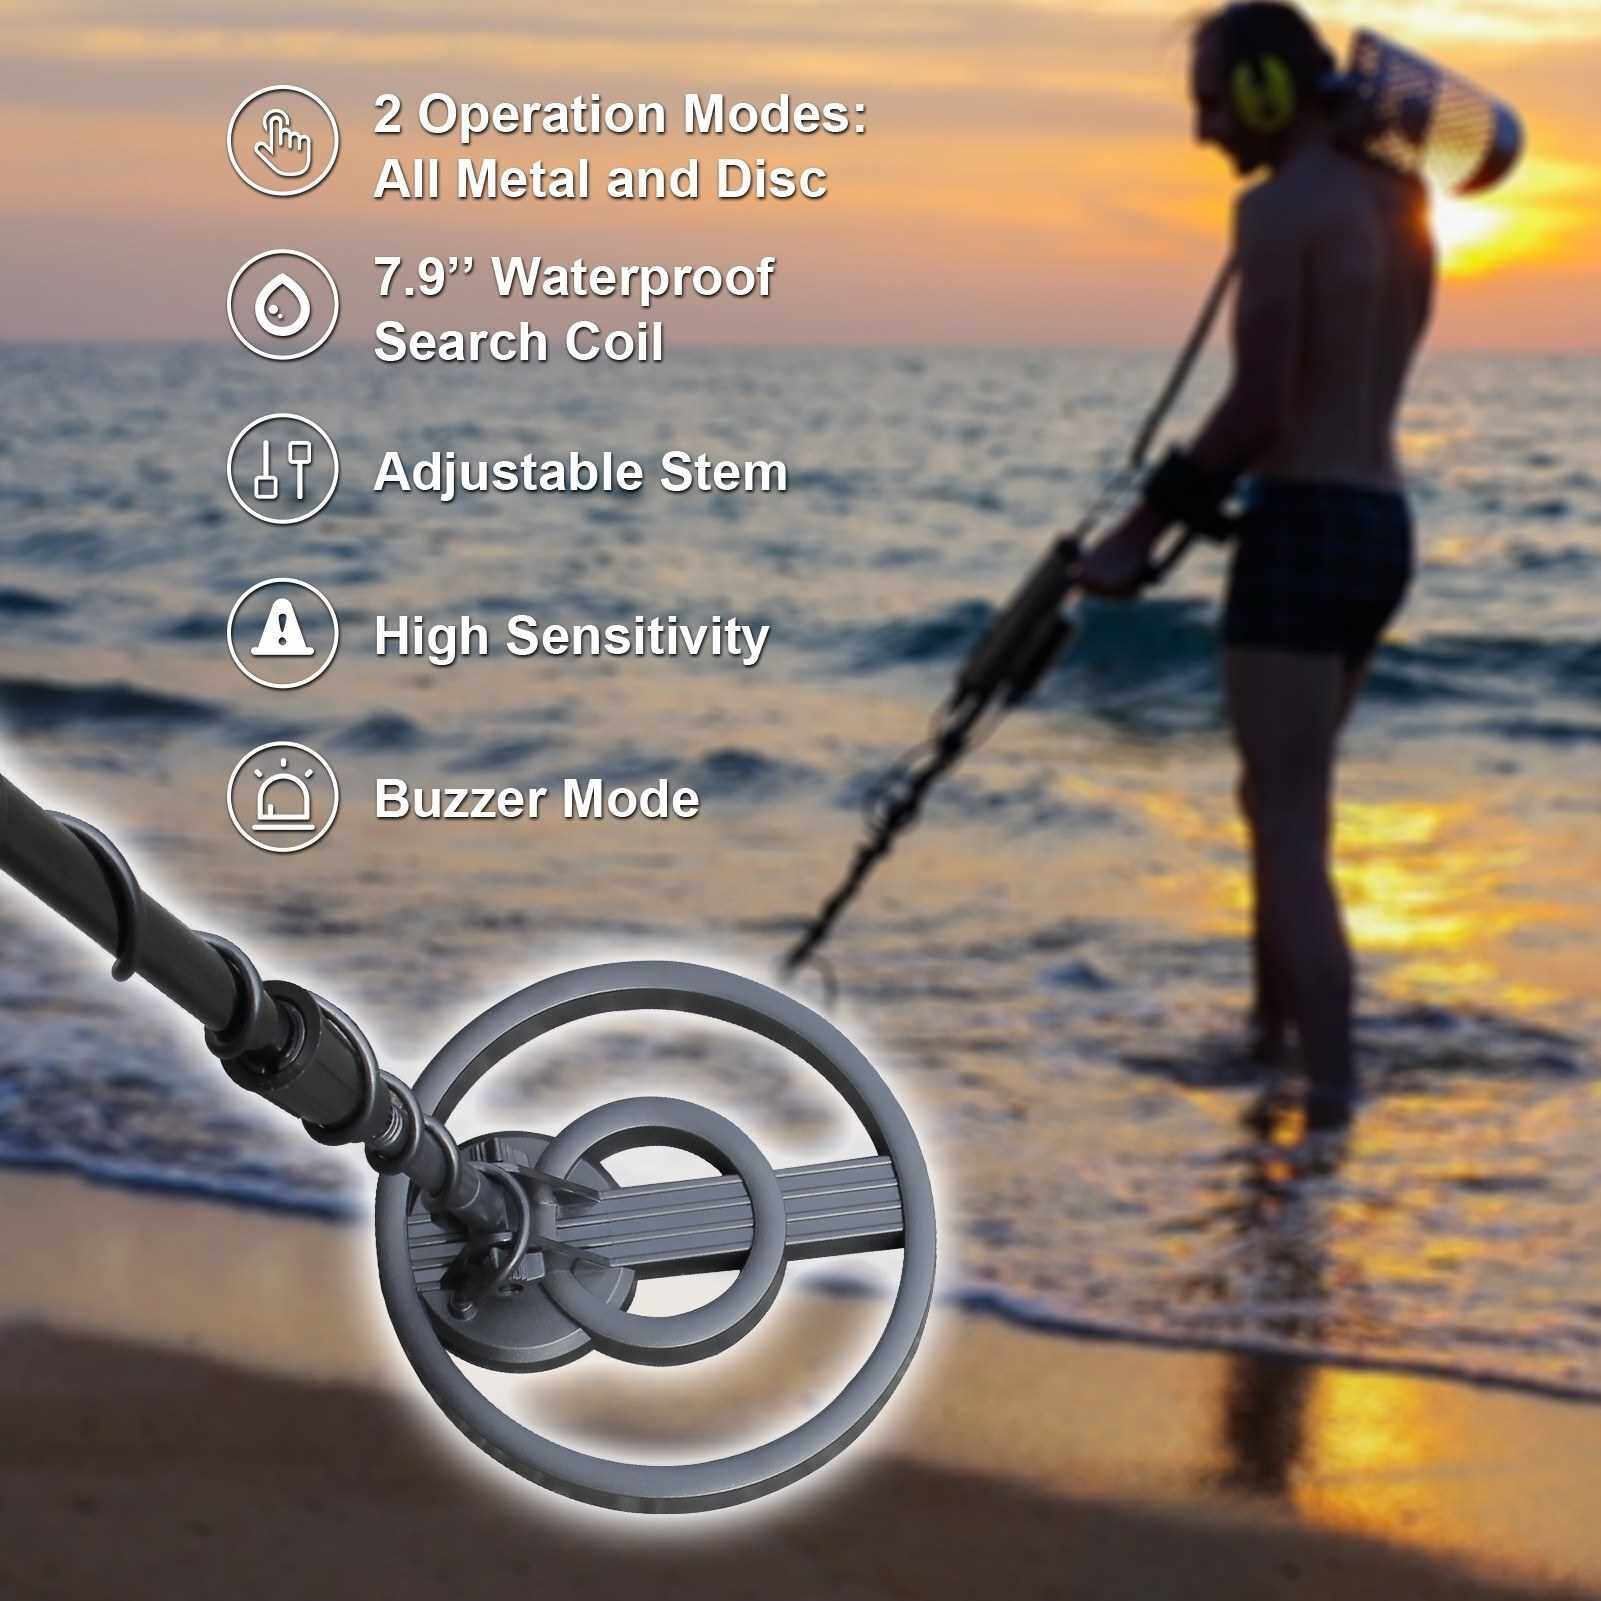 Metal Detector High Accuracy Adjustable Stem 7 Inch Waterproof Coil All Metal & Disc Modes for Underground Coins Relics Jewelry Beach Treasures (2)